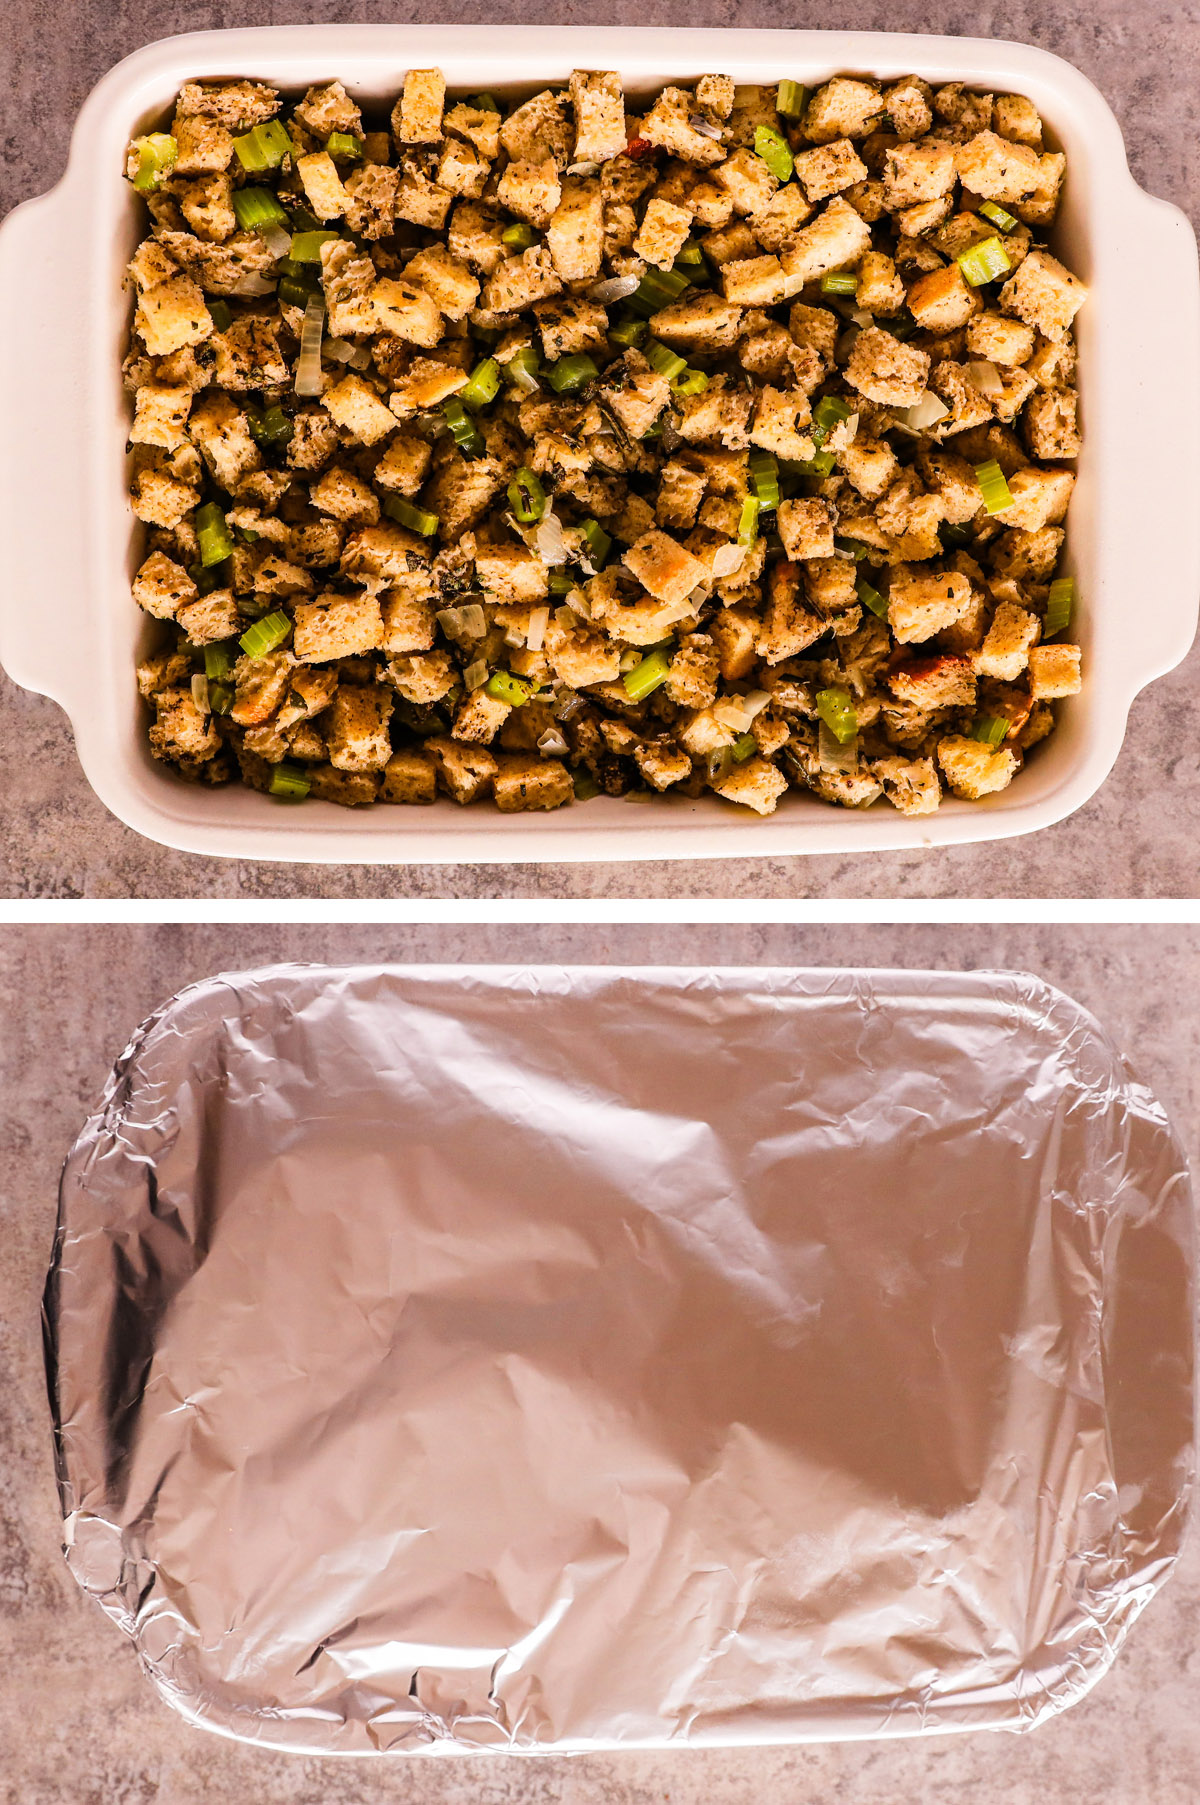 Casserole dish with stuffing, first uncovered then covered with foil